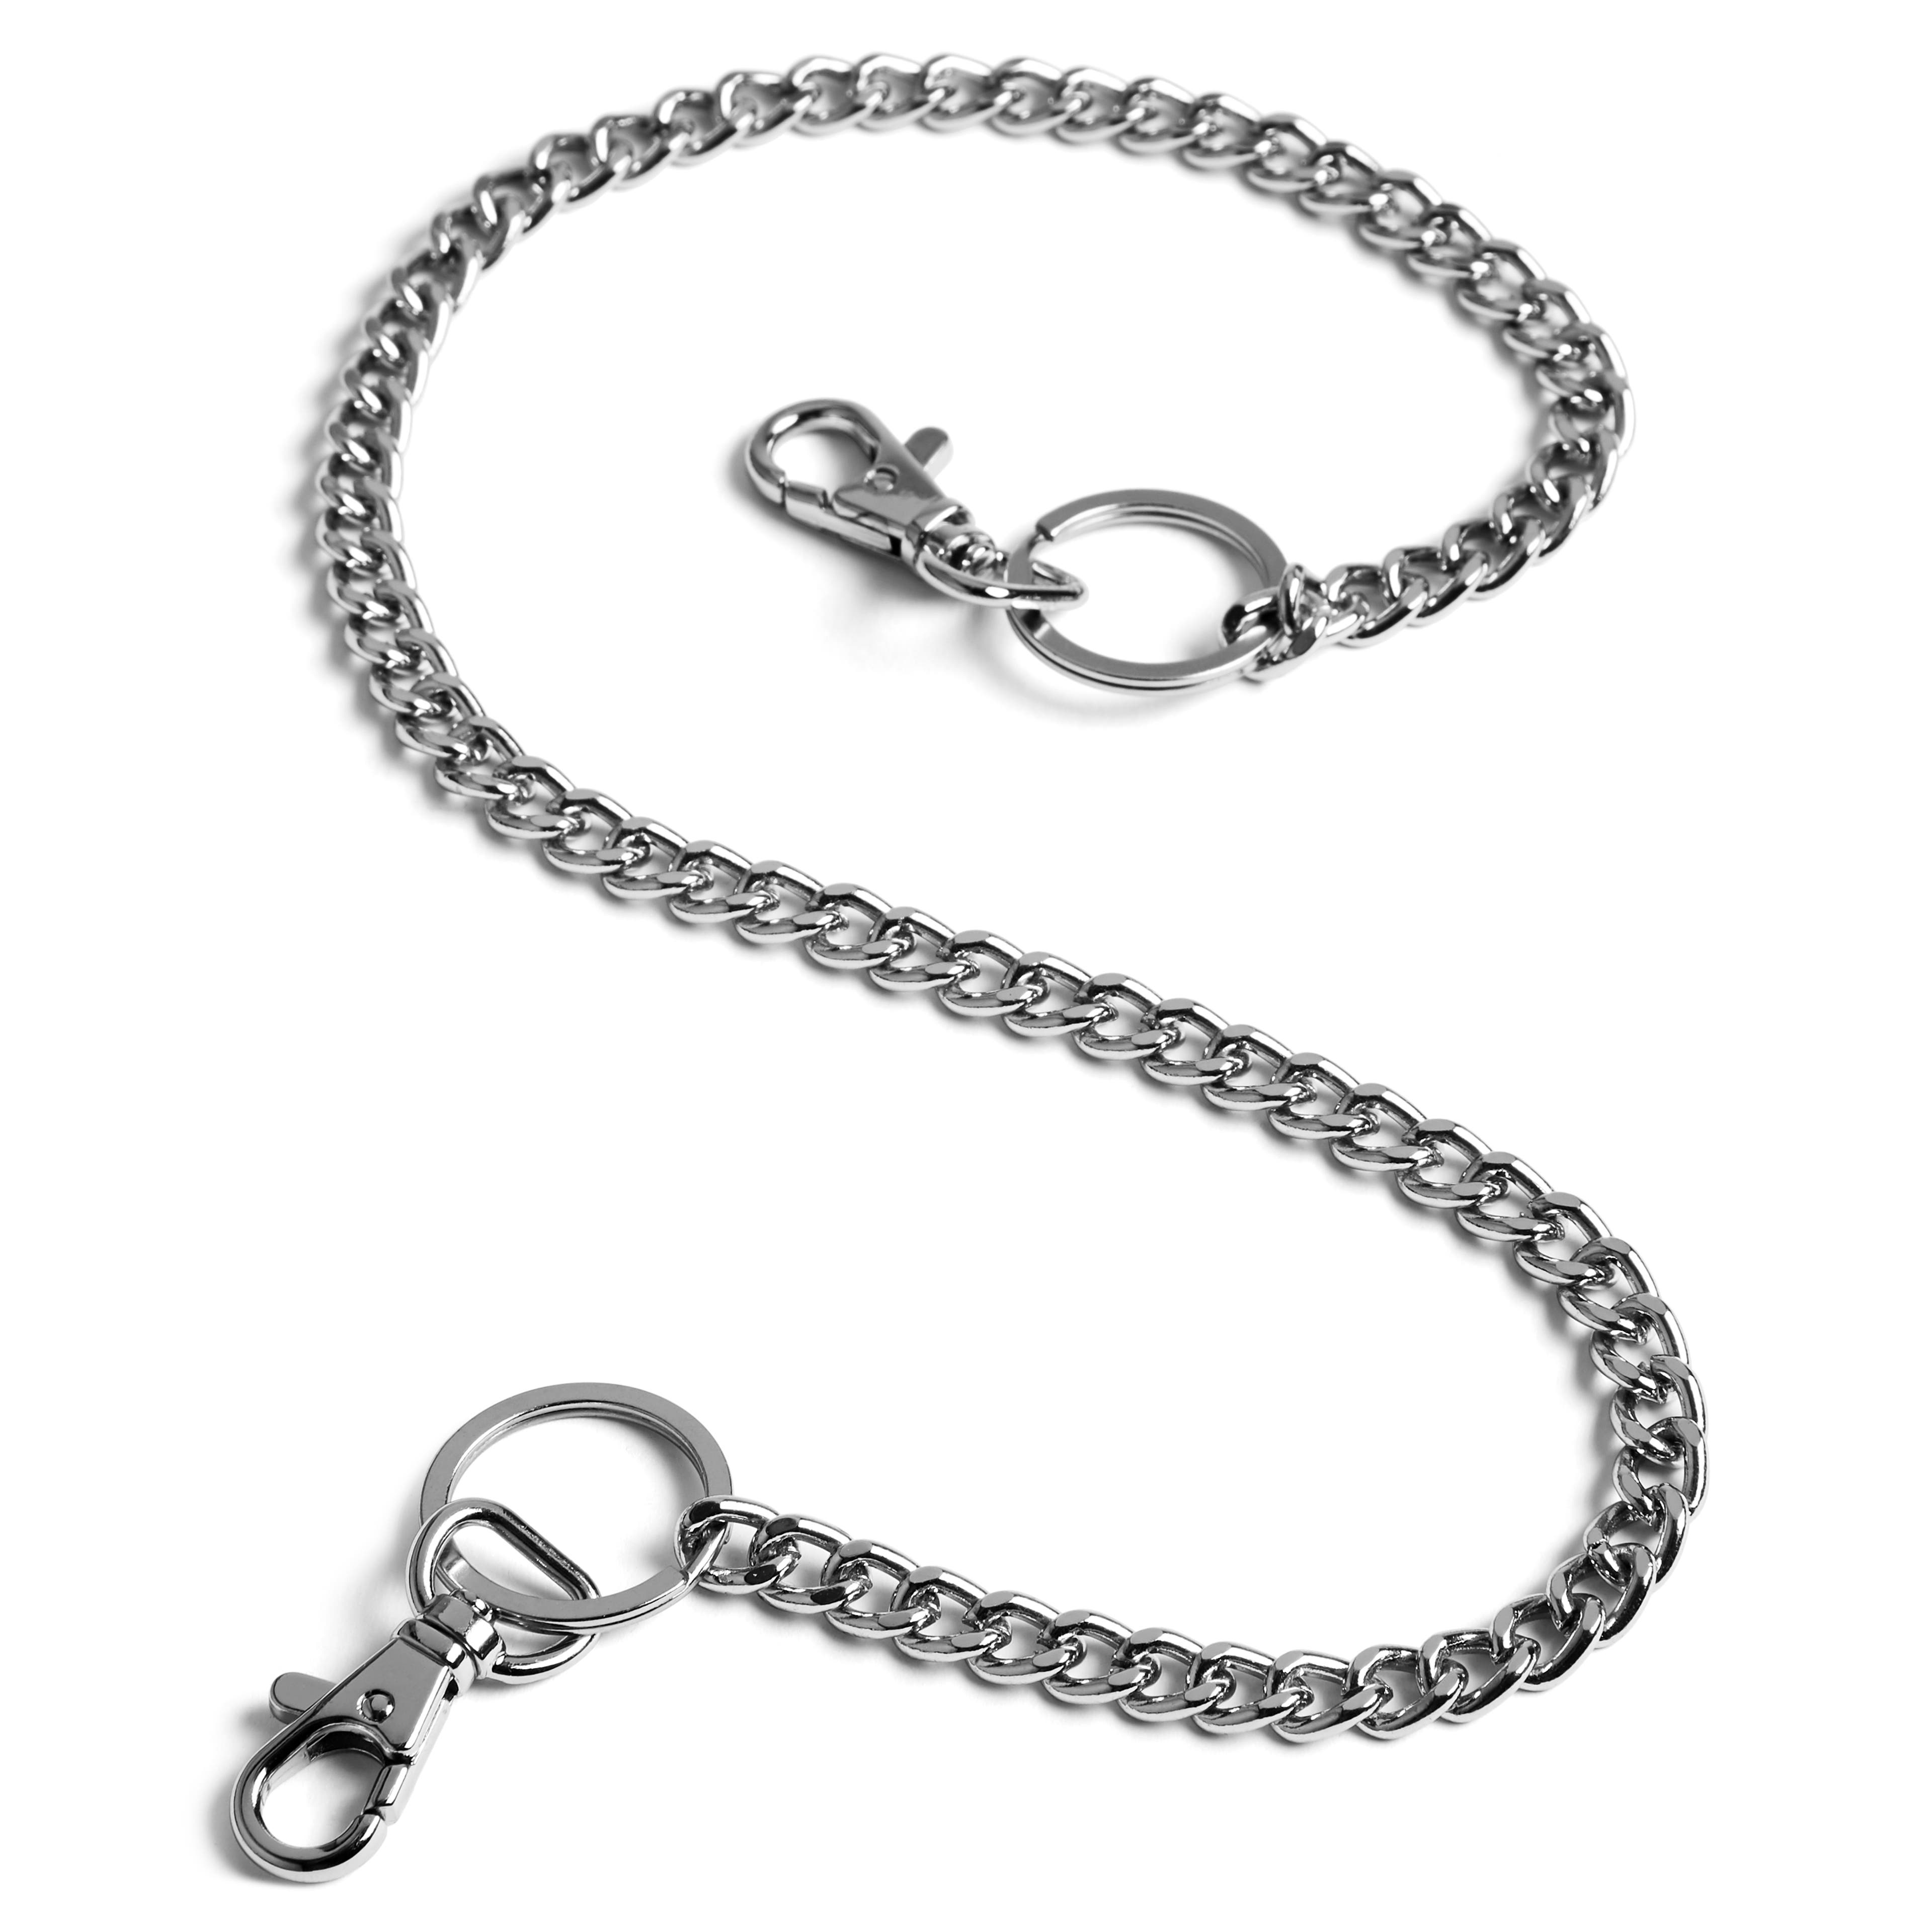 Double Strand Wallet Chain, Heavy Wallet Chain, Stainless Steel